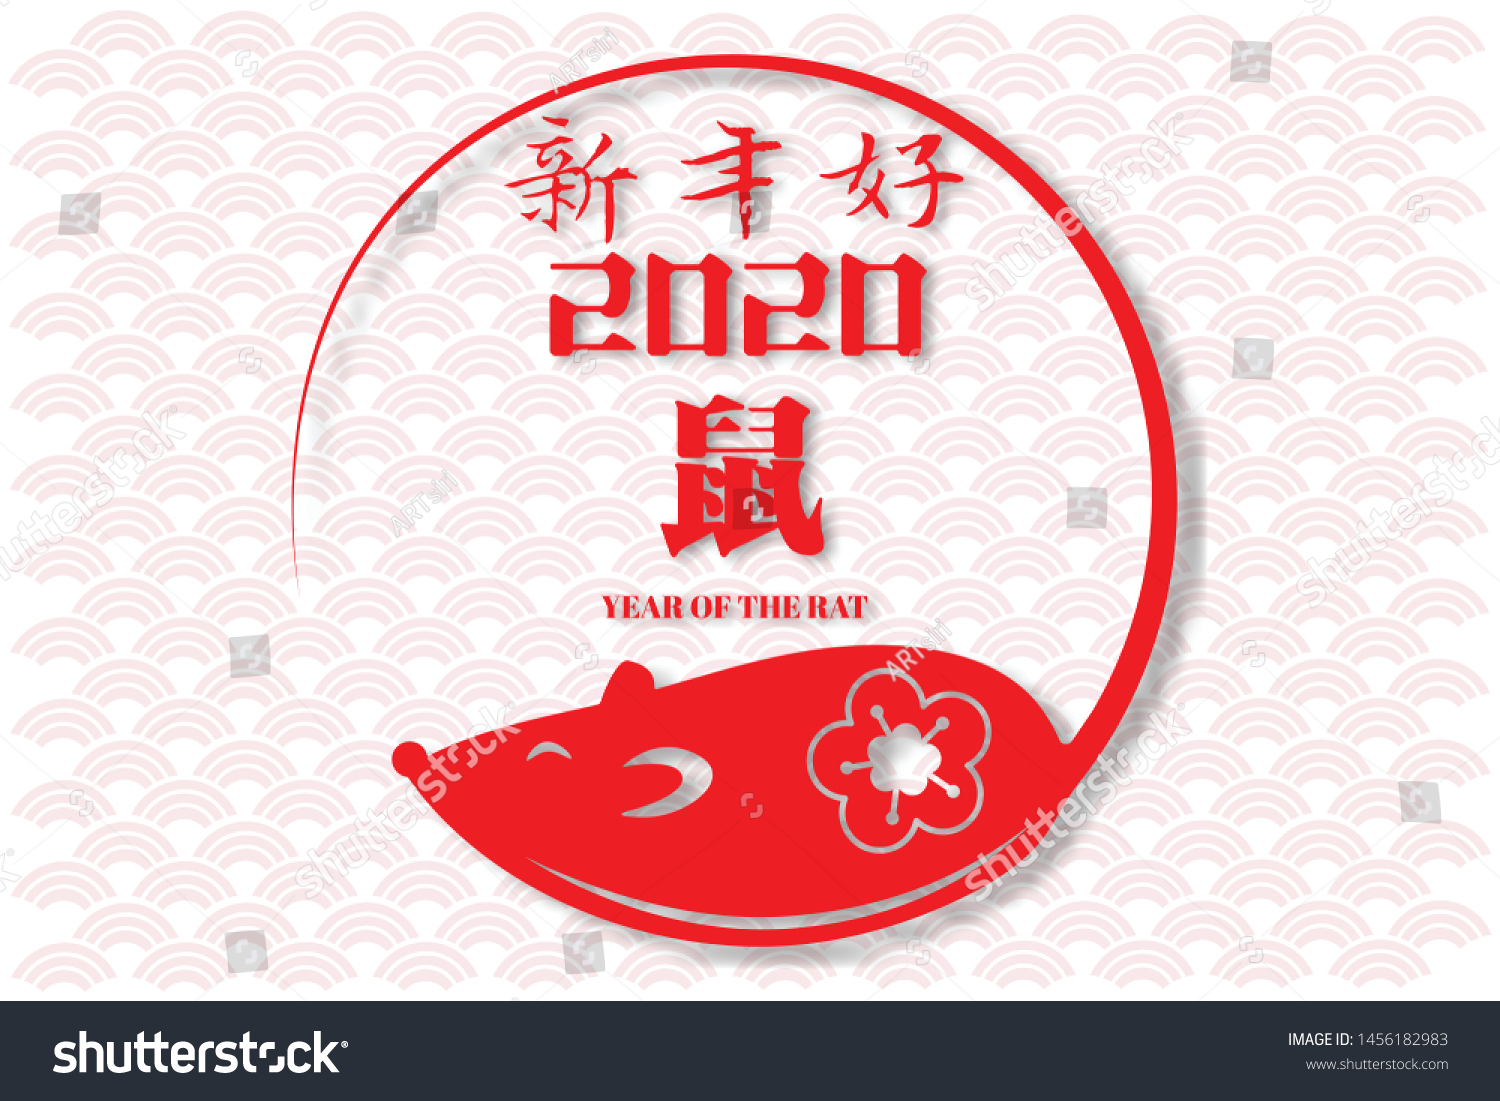 Chinese Zodiac Sign Year of Rat,Red Paper cut rat,Happy Chinese New Year 2020 year of the rat  (Translation : Happy Chinese new year) #1456182983